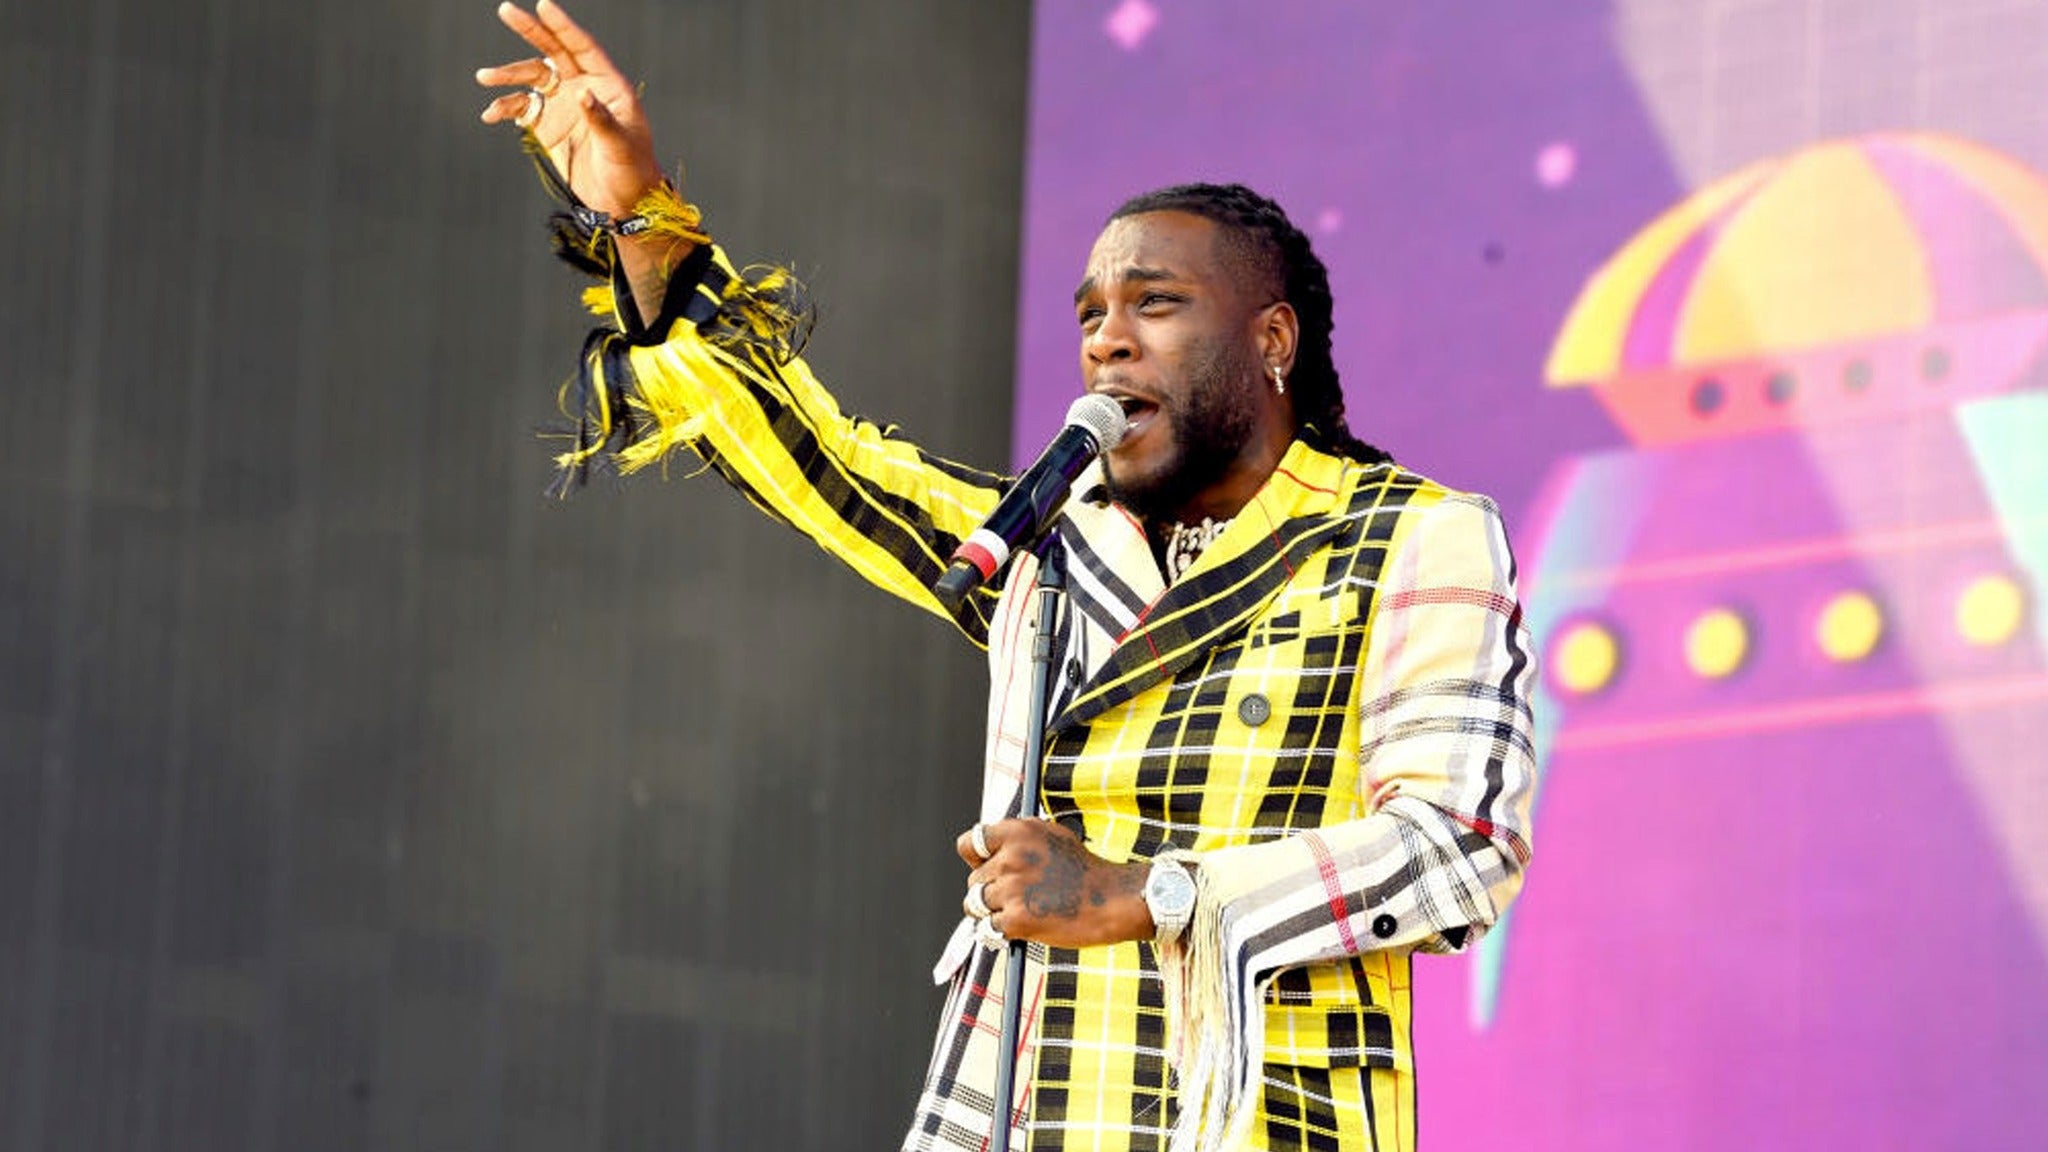 Burna Boy - Twice As Tall Tour in Atlanta promo photo for Live Nation Mobile App presale offer code